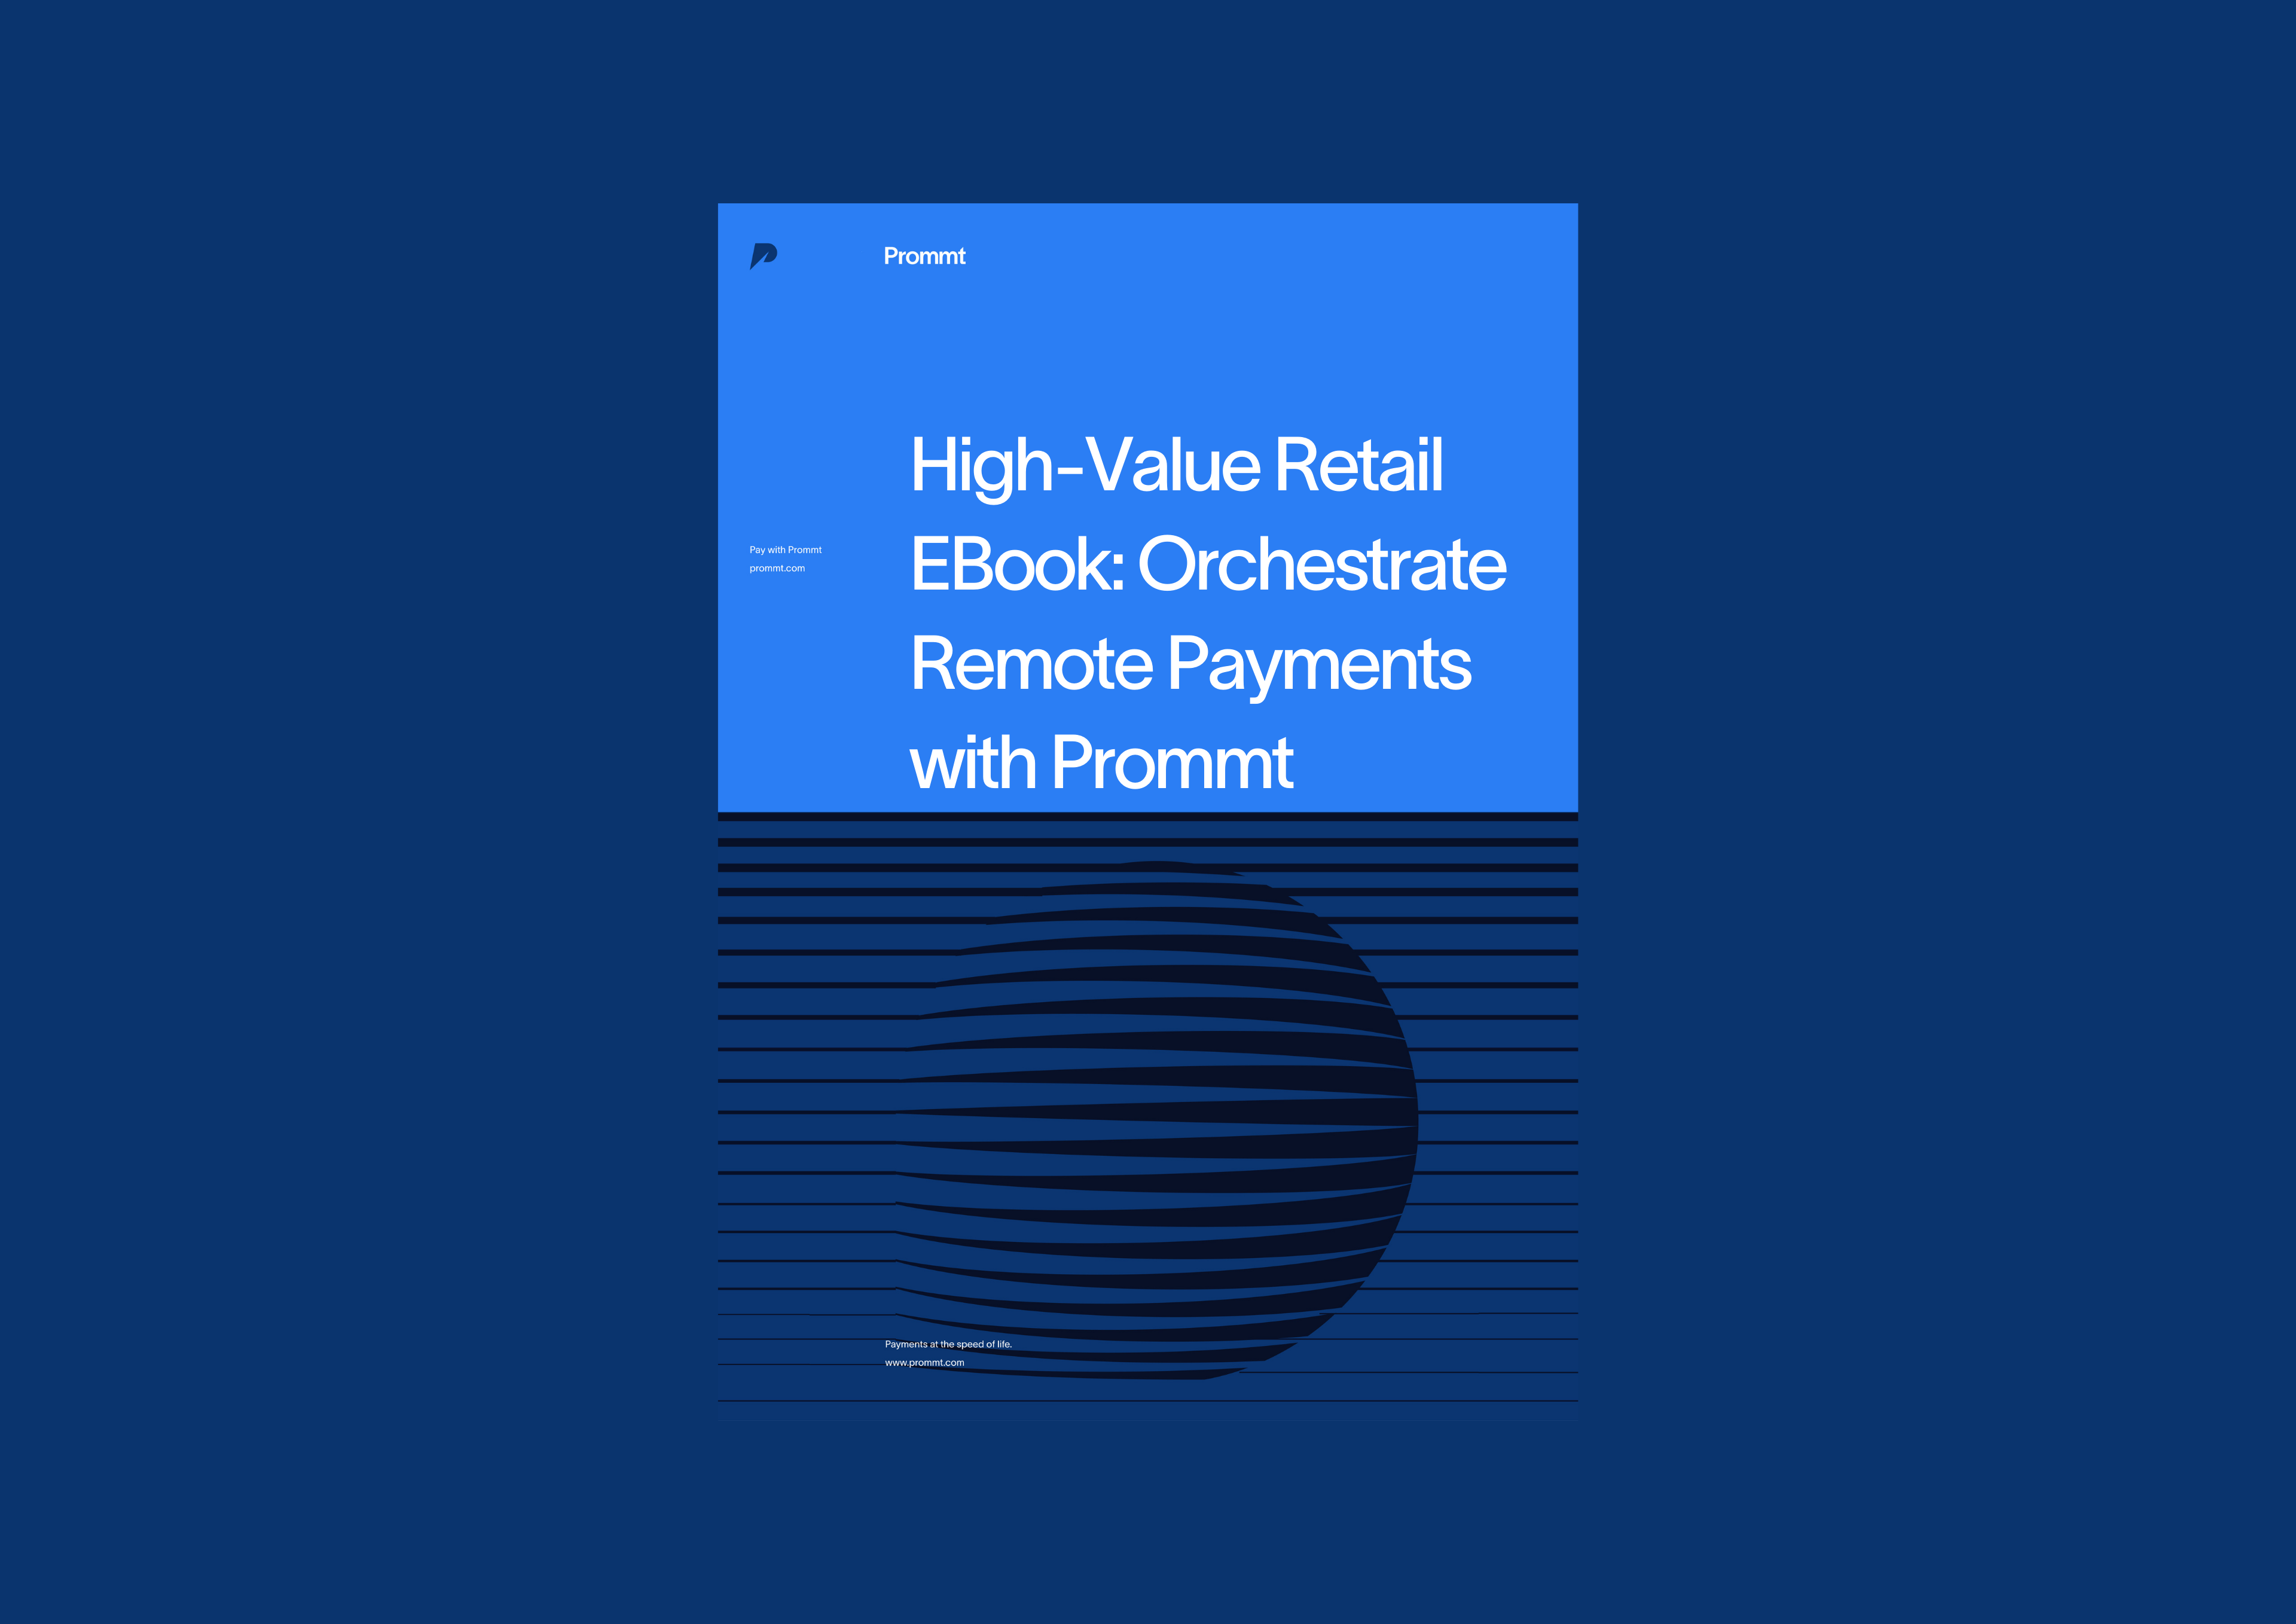 High-Value Retail EBook: Orchestrate Remote Payments with Prommt